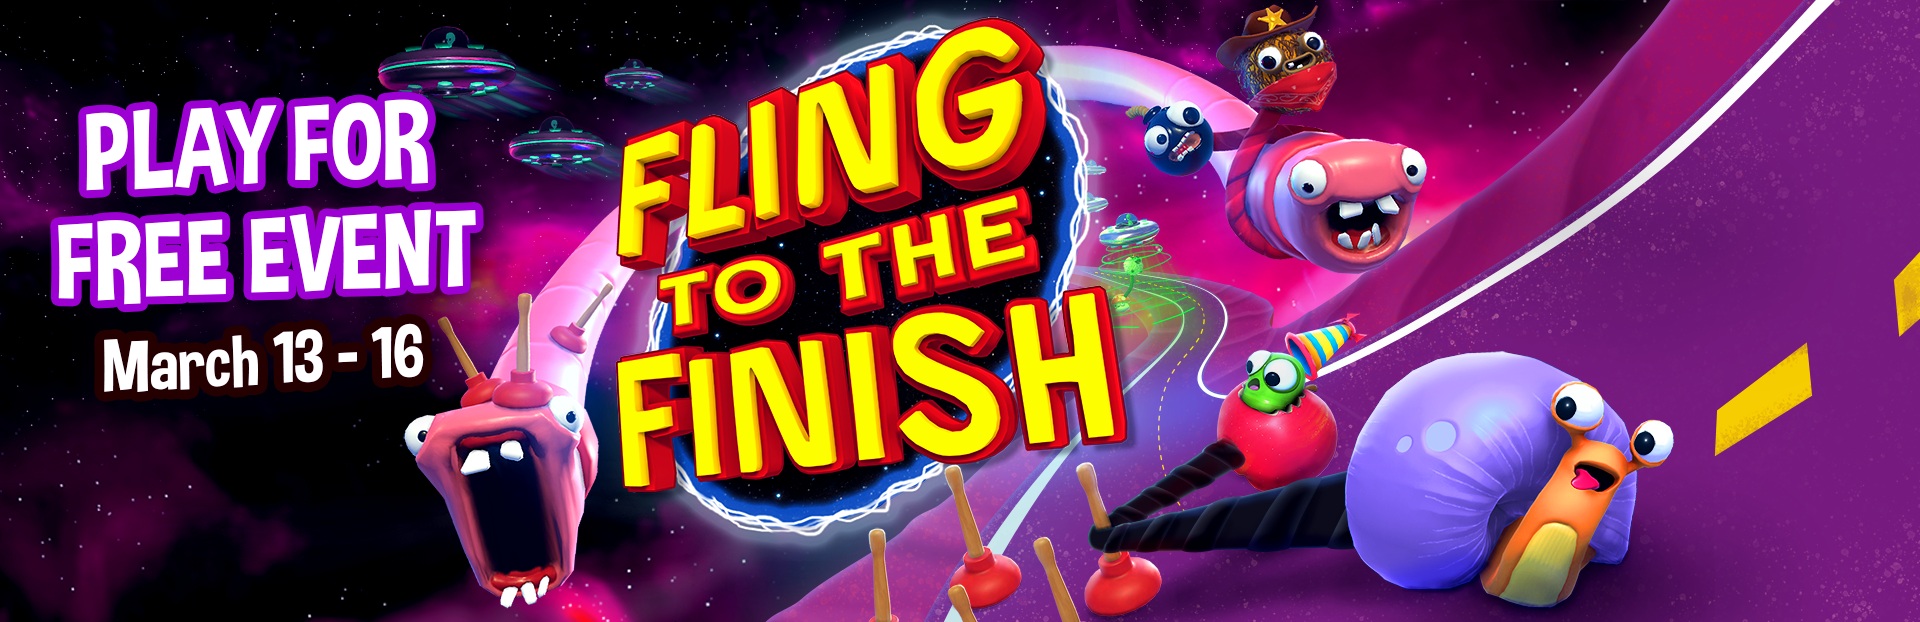 Save 65% on Fling to the Finish on Steam